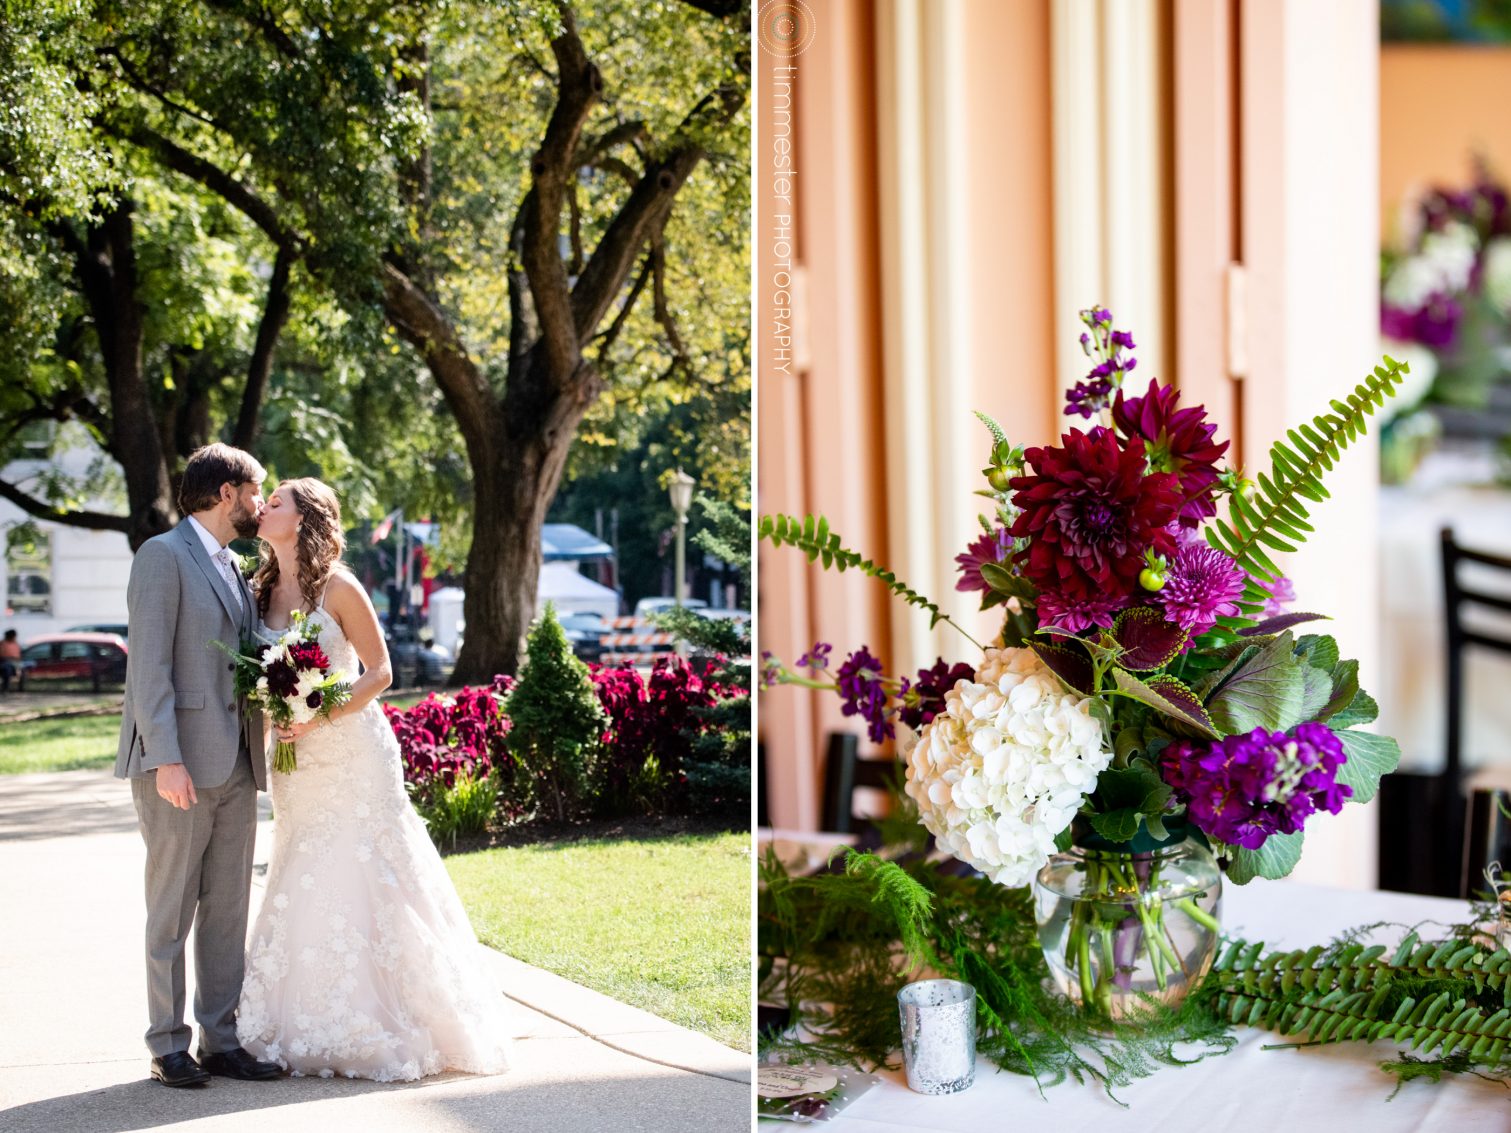 A Caffe Luna wedding with portraits at the Capitol grounds in Raleigh, NC.